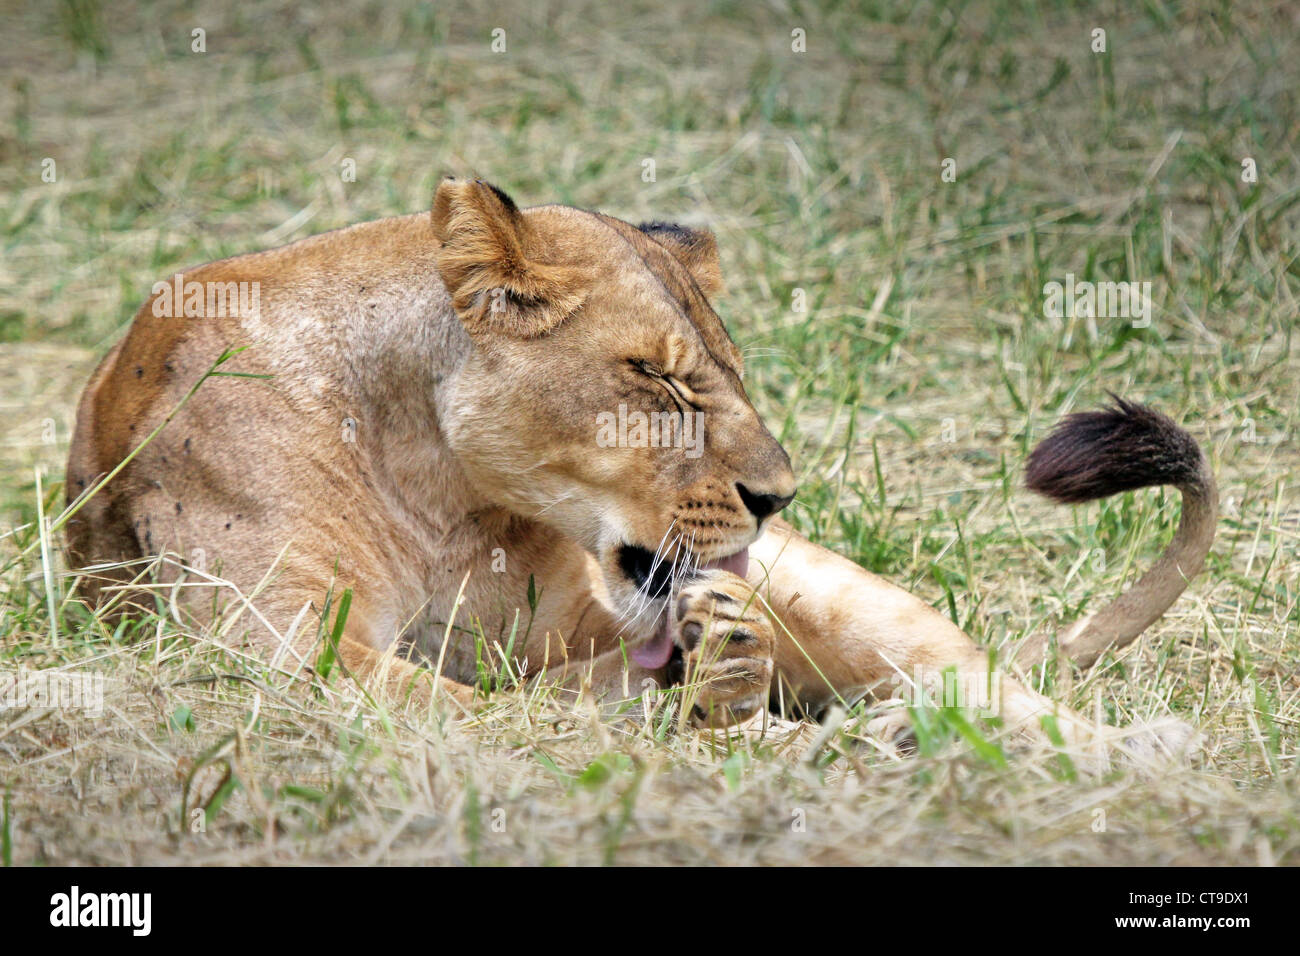 A young WILD female Lion rests in the grass and cleans her fur in the Masai Mara, Kenya, Africa. Stock Photo